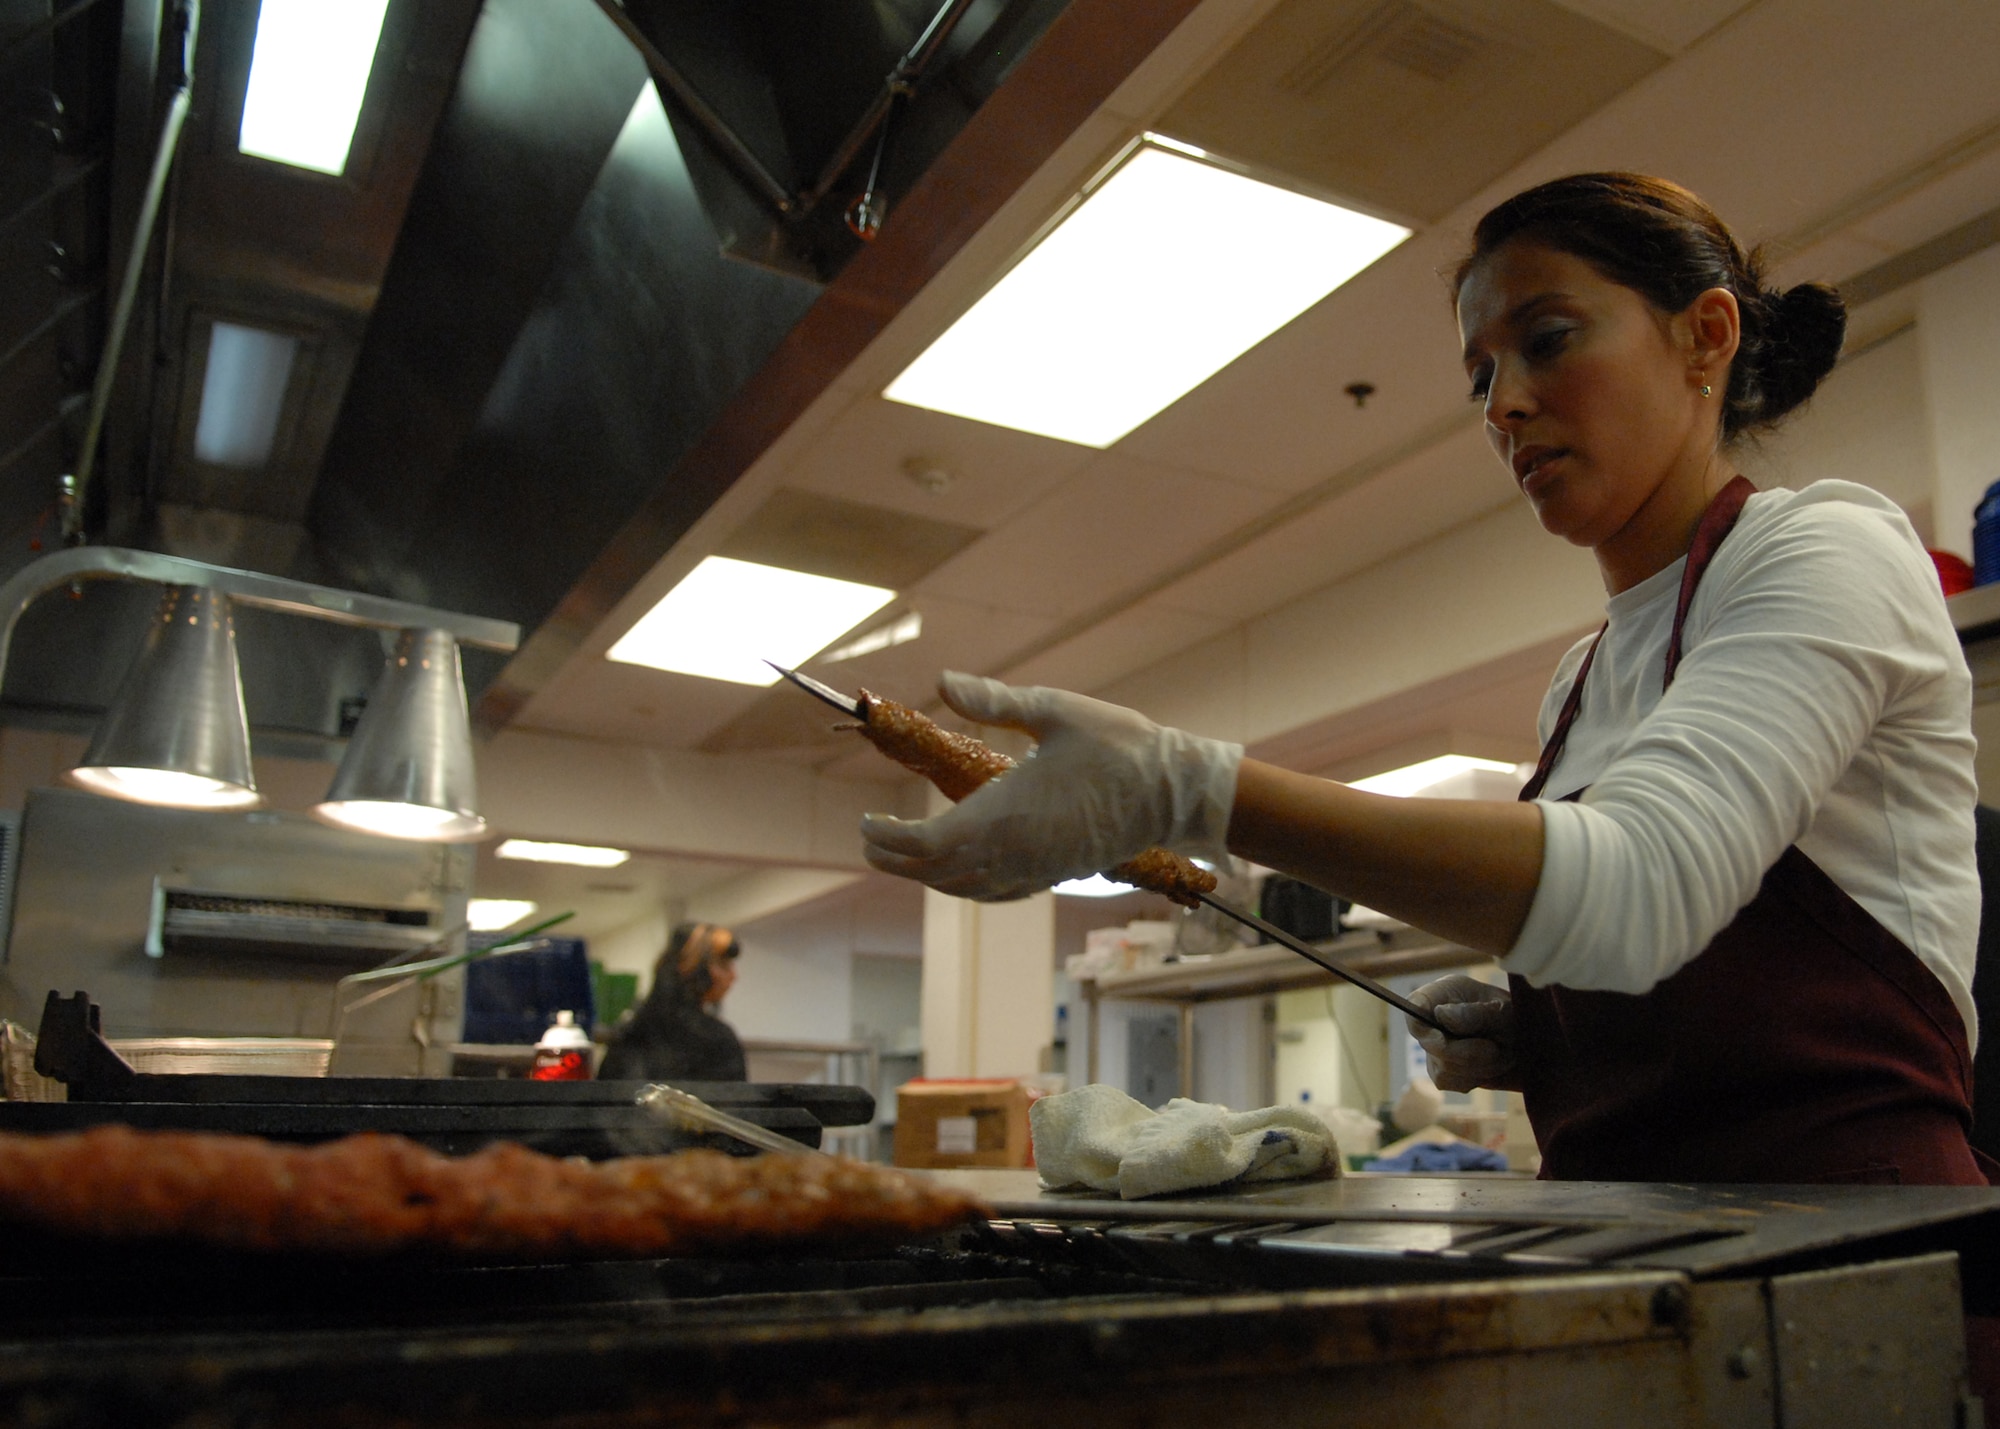 VANDENBERG AIR FORCE BASE, Calif. -- During three days of extensive preparation, Sakine Luzero puts the finishing touches on a traditional Turkish food item, the Adana Kabob, the main dish for the Passport to Turkey held here Friday, Nov. 6, 2009.The festivities were all a part of the event held at the Pacific Coast Club which included traditional Turkish food, tribal belly dancing and music. (U.S. Air Force photo/Airman 1st Class Angelina Drake)